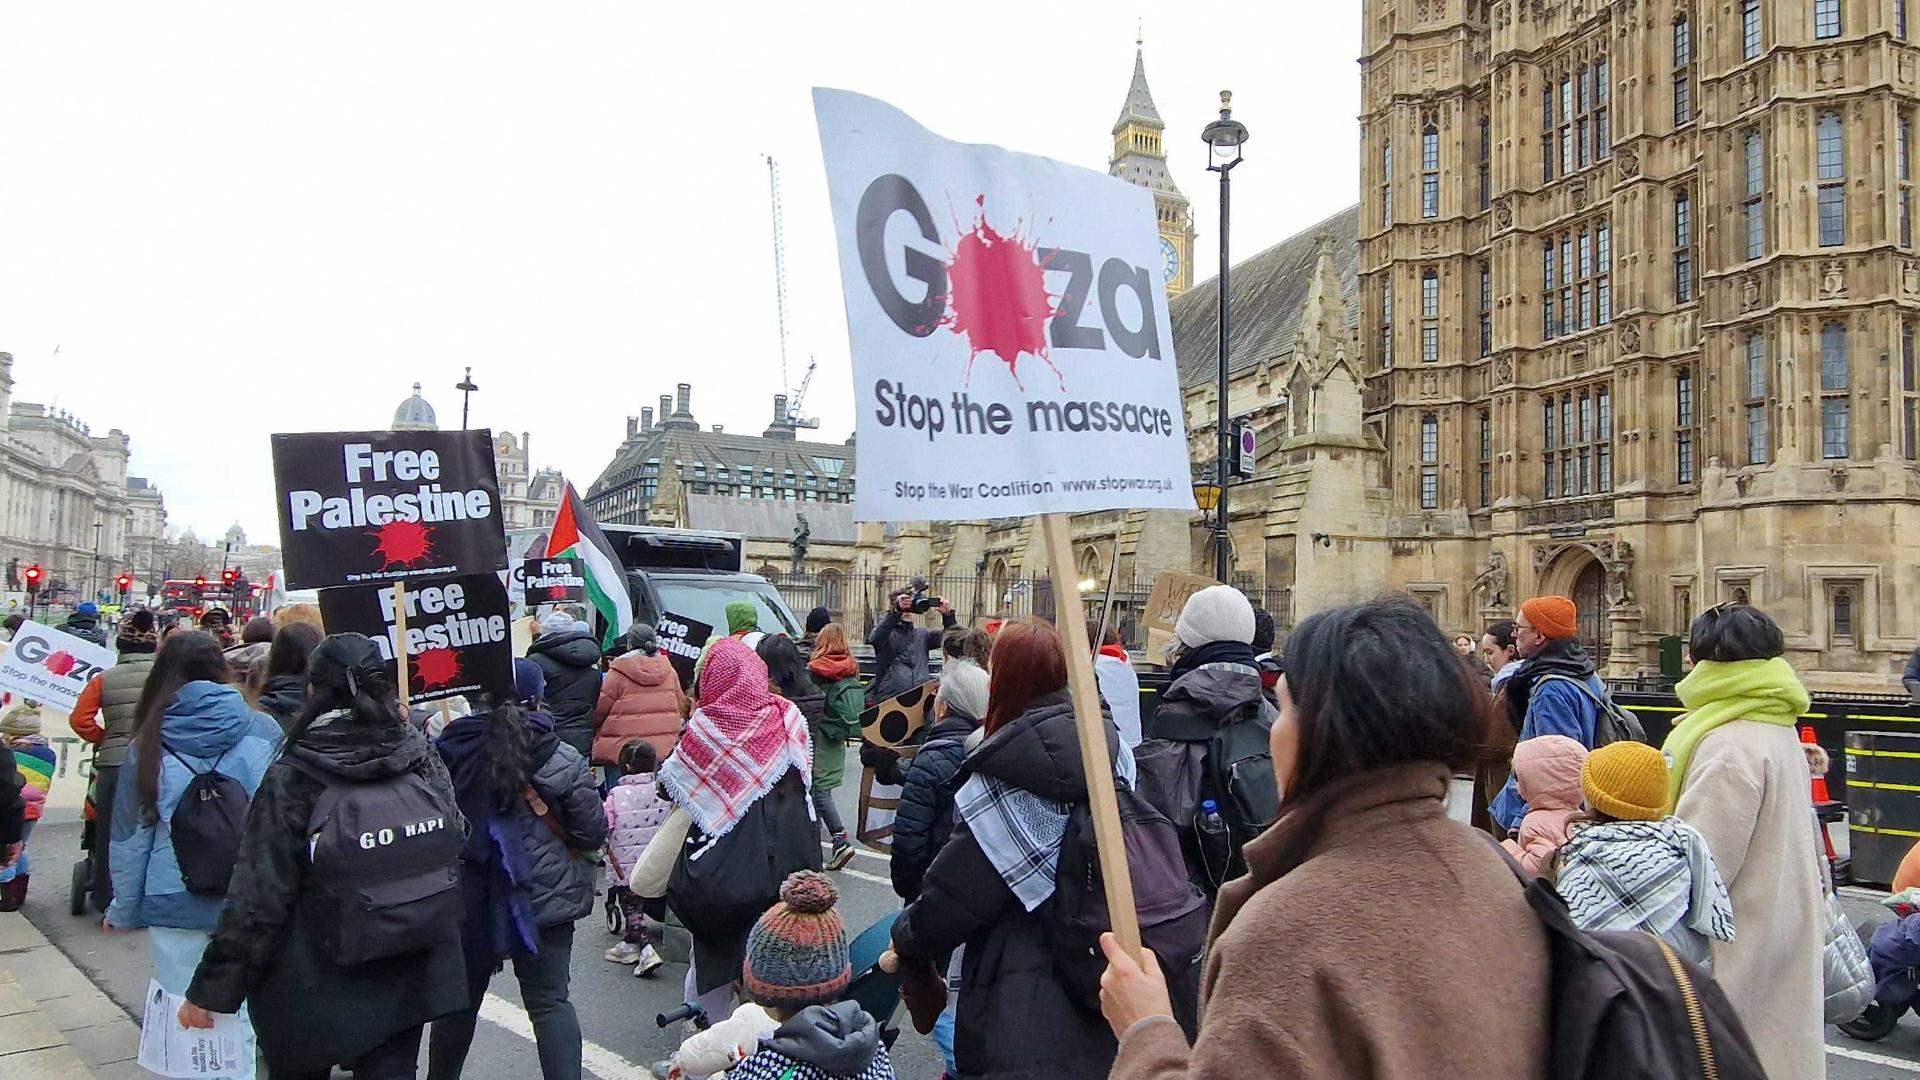 British lawmakers fear for their safety as Gaza tensions flare